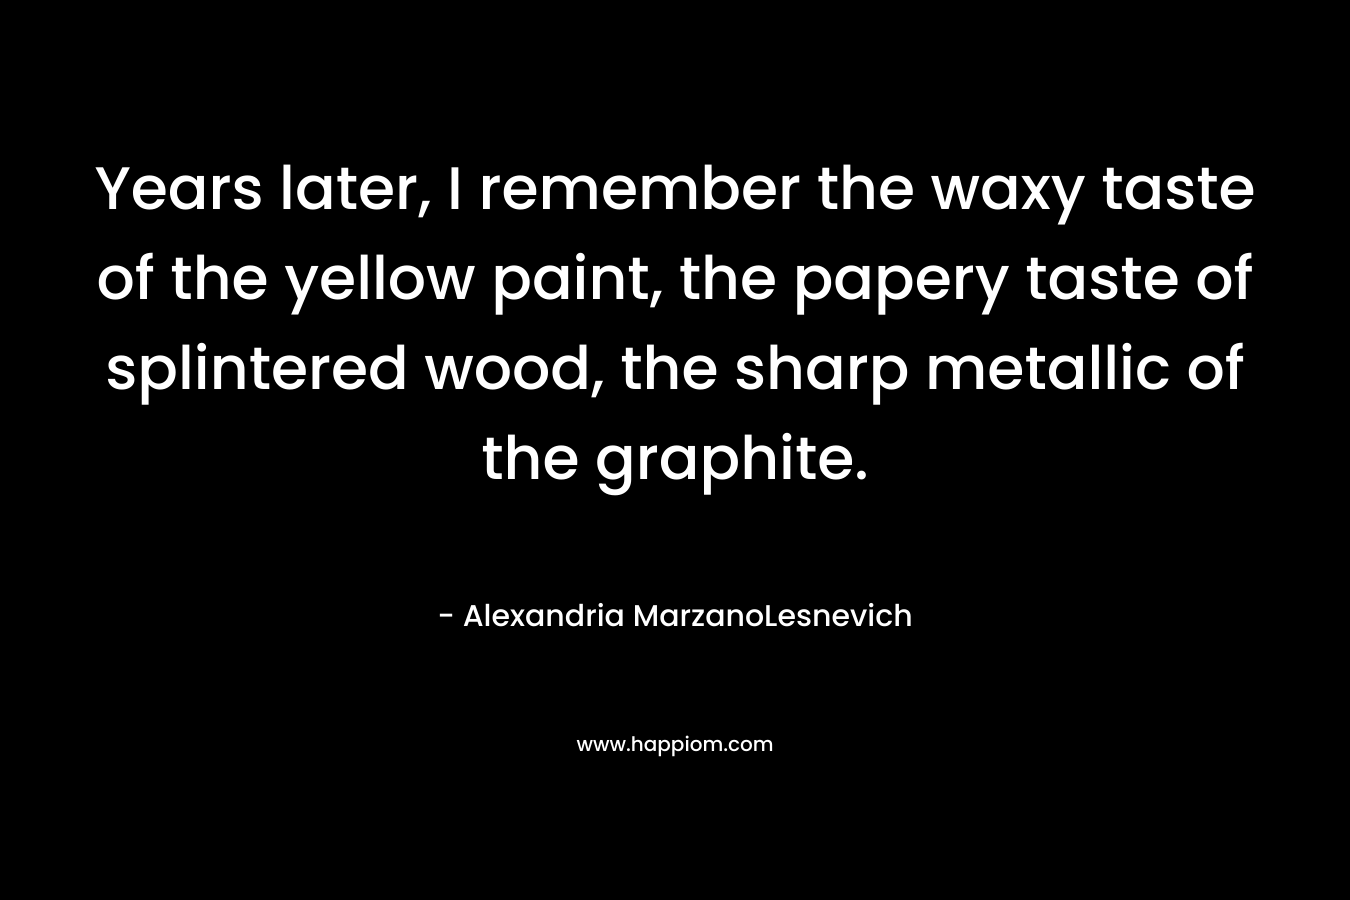 Years later, I remember the waxy taste of the yellow paint, the papery taste of splintered wood, the sharp metallic of the graphite. – Alexandria MarzanoLesnevich